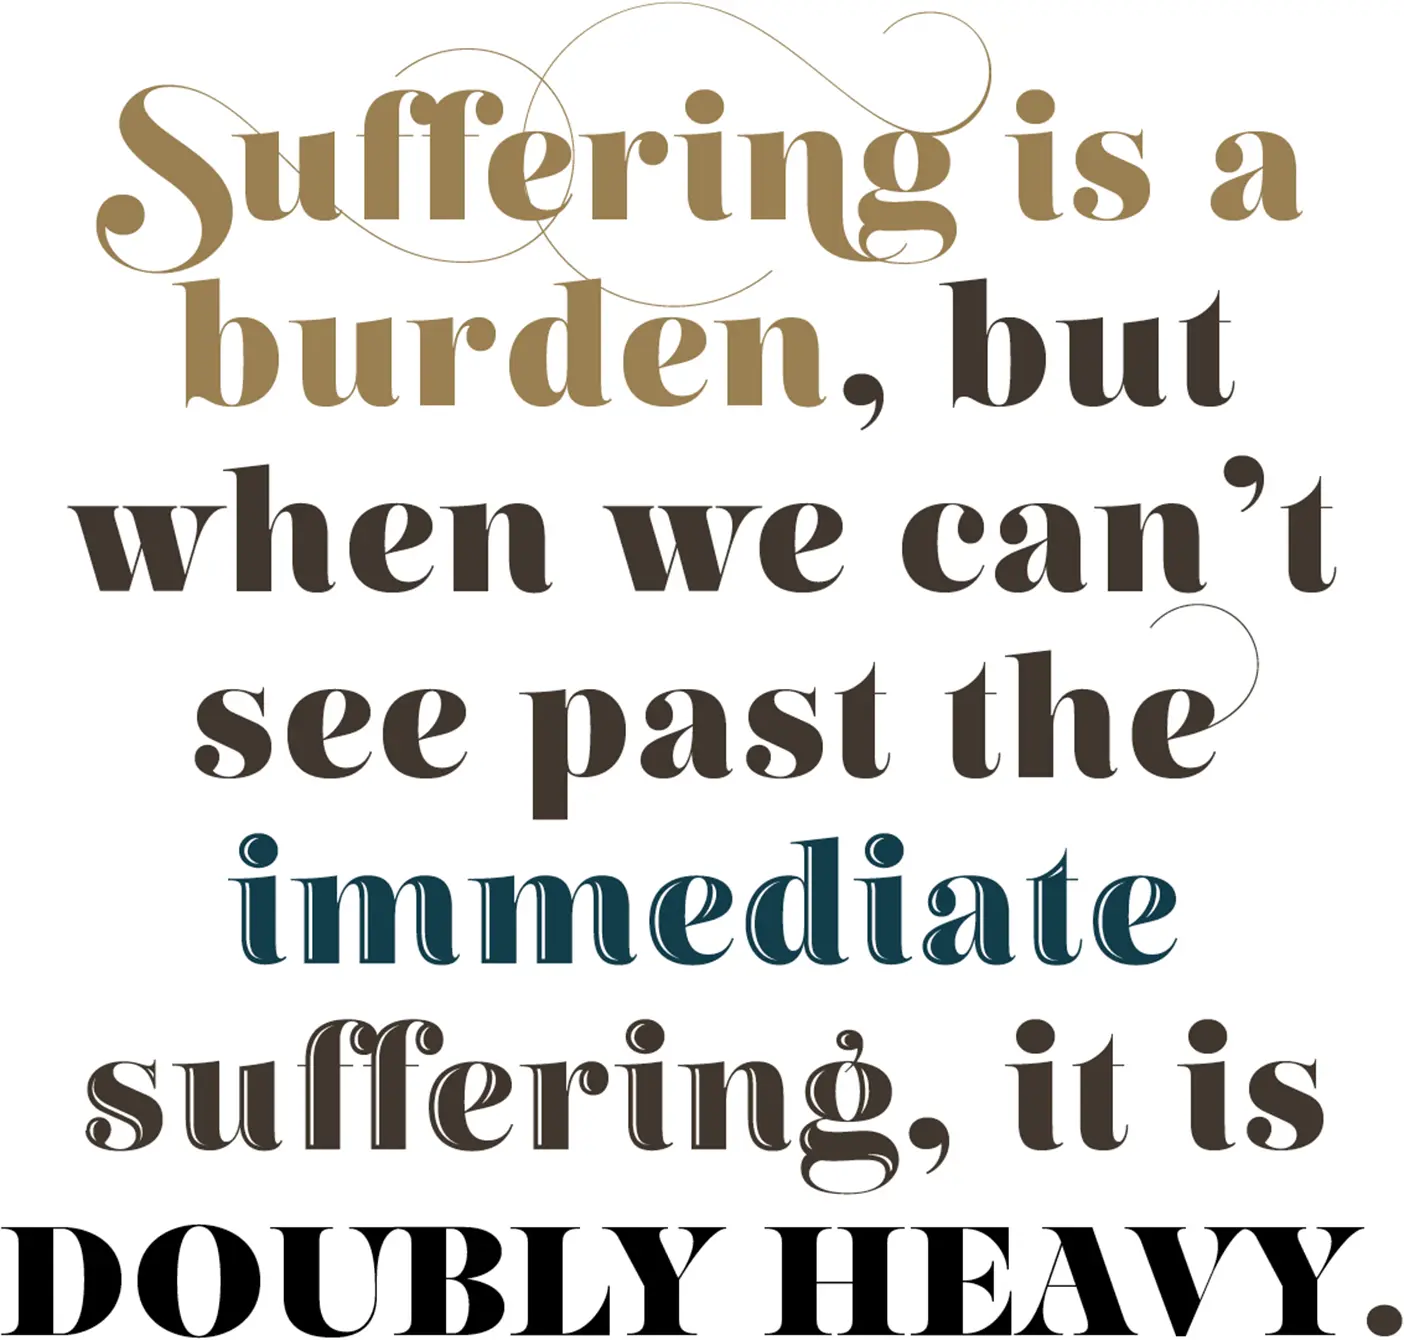 Suffering is a burden, but when we can't see past the immediate suffering, it is DOUBLY HEAVY.